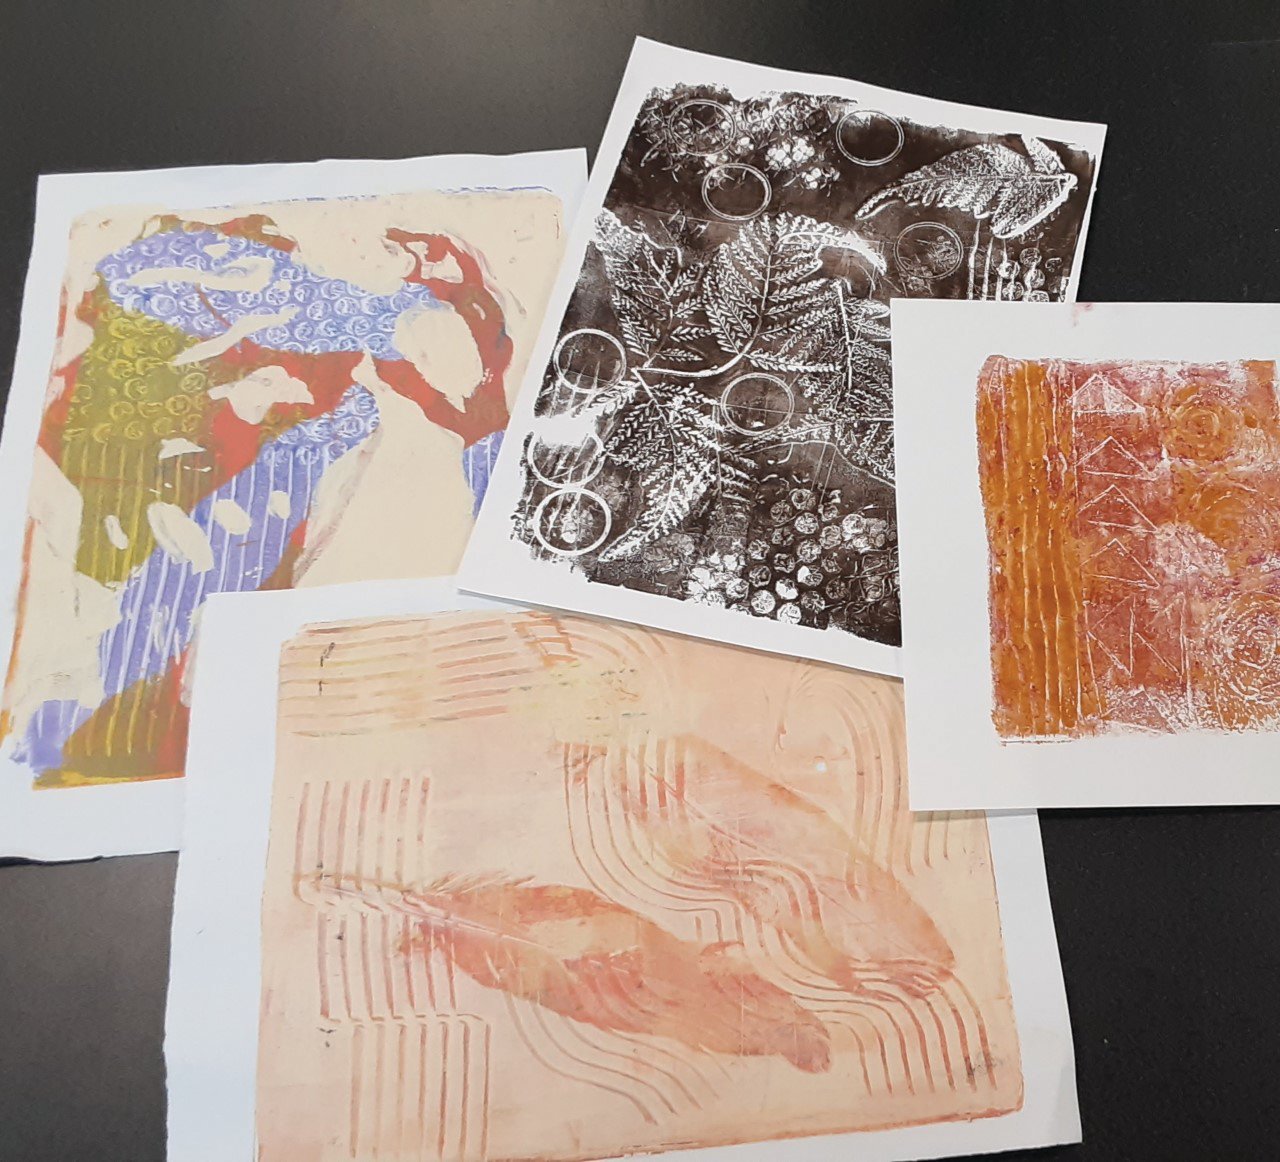 A Gelli plate is a reusable printing surface that allows you to make monoprints. Simply roll acrylic paint onto a plate that is a clear gelatinous slab. The paint is then manipulated to create unique art.